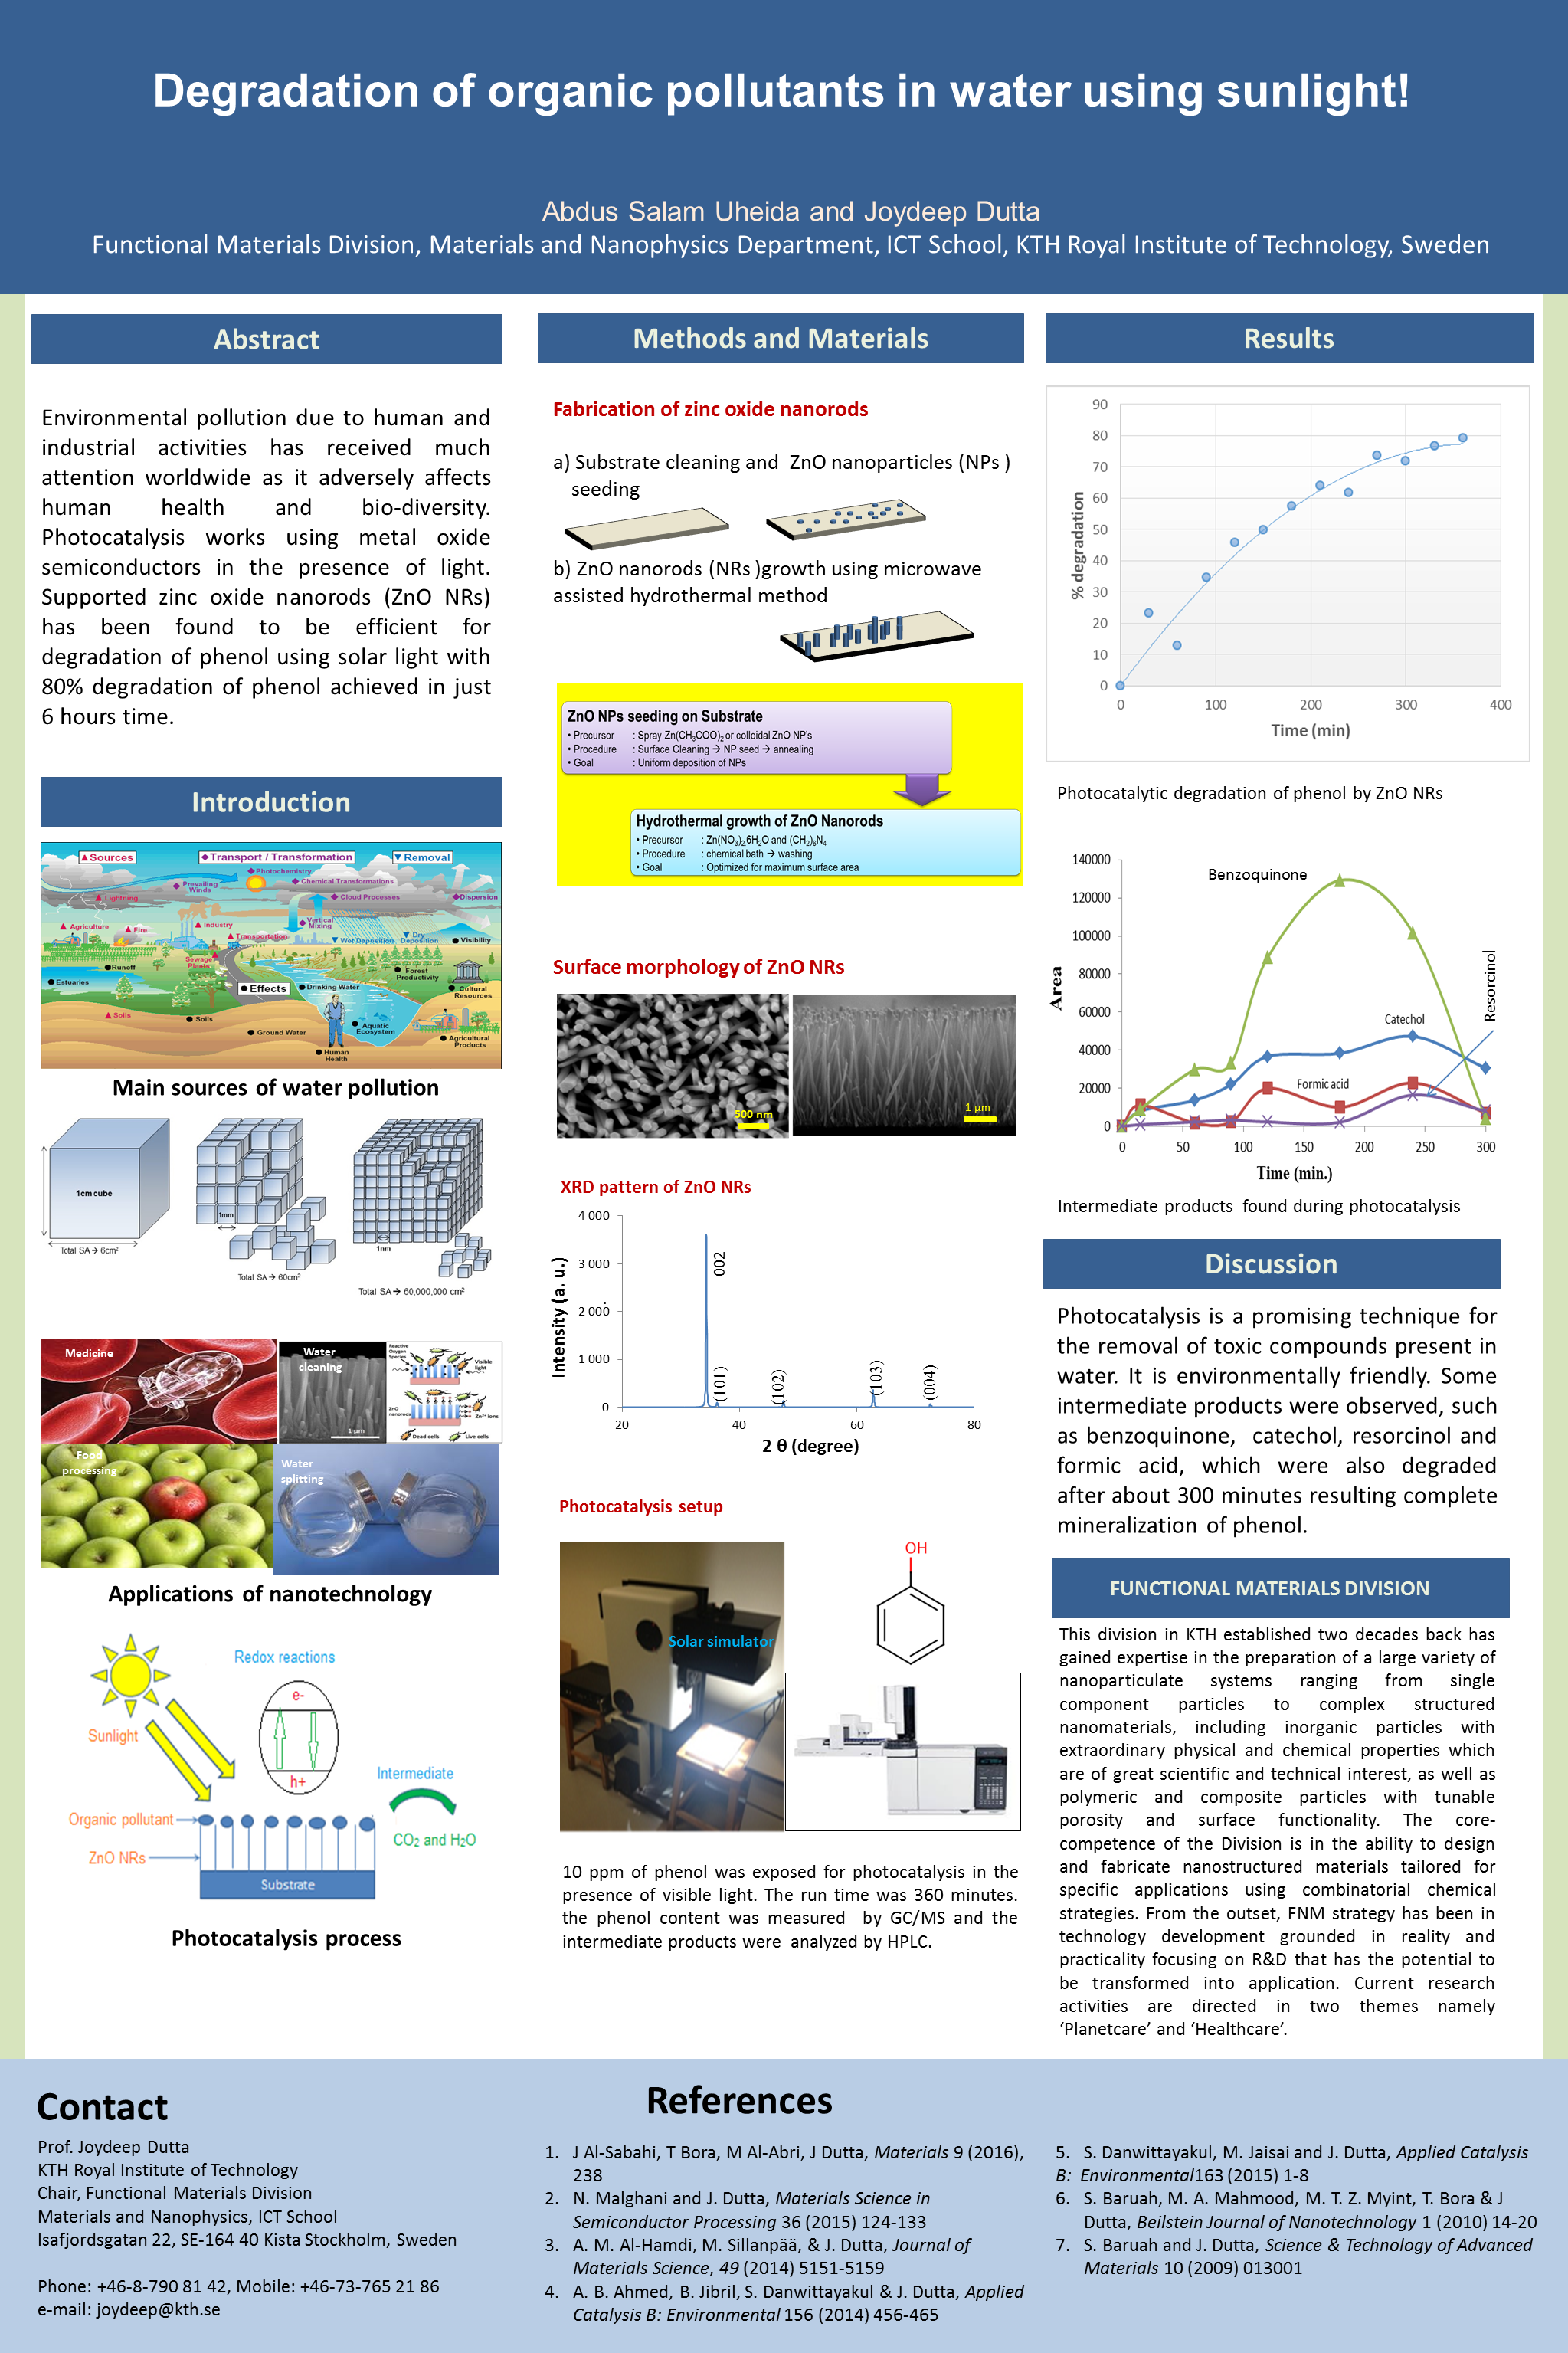 Research poster about the project.